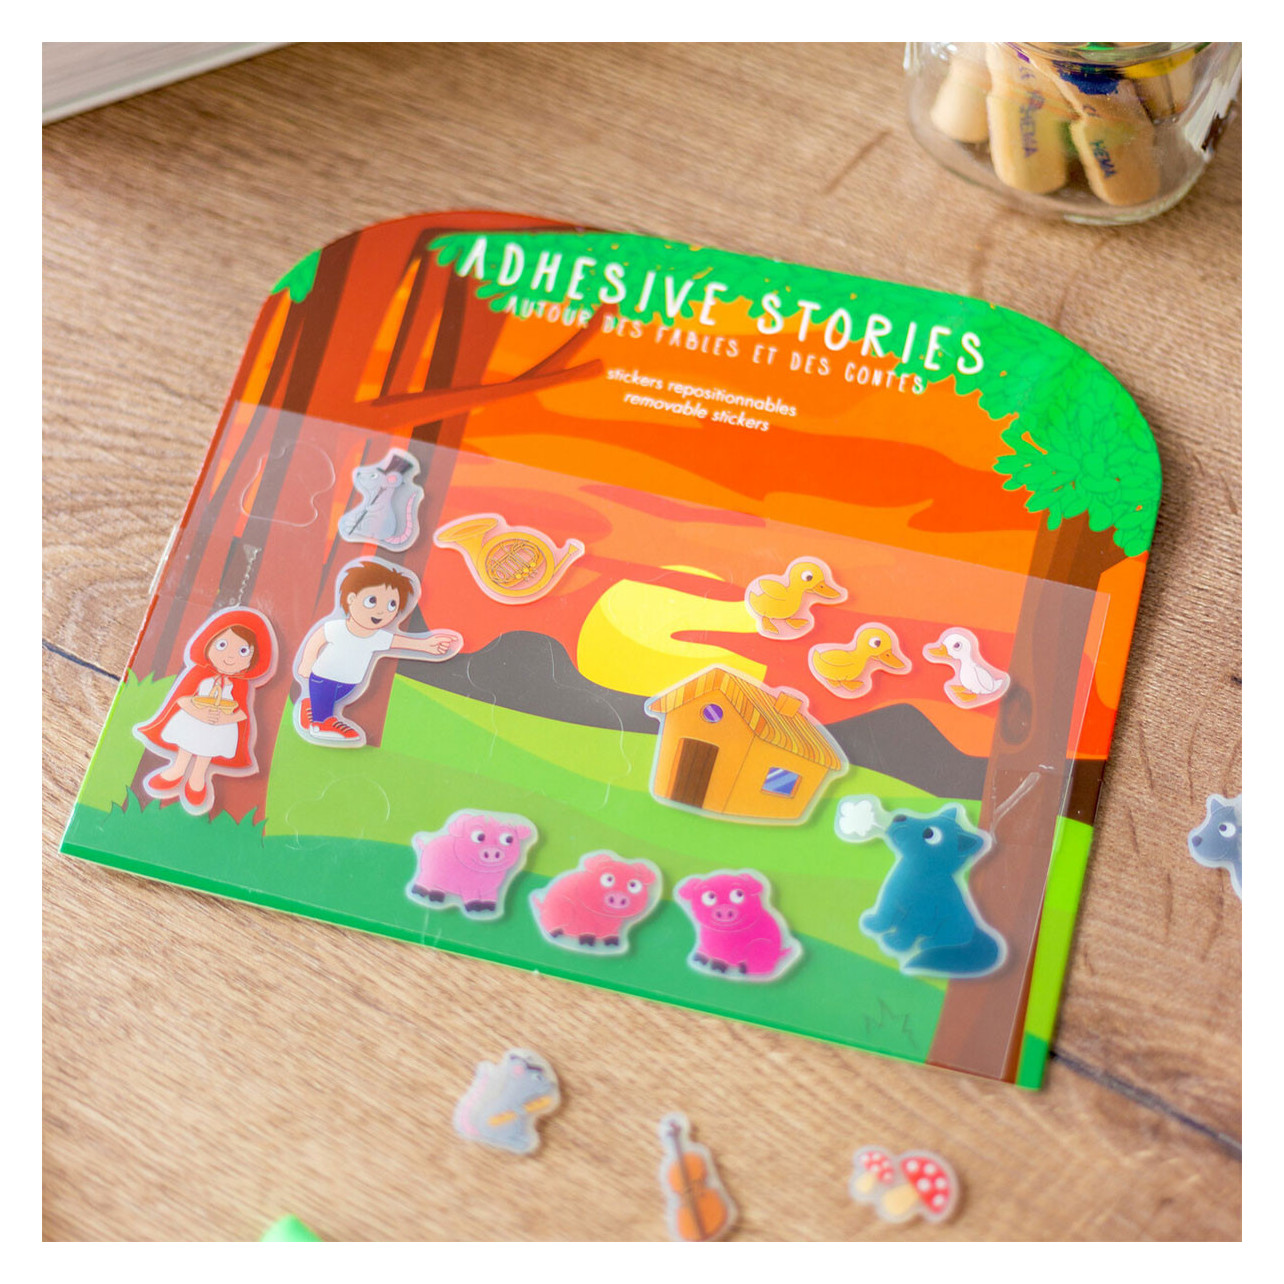 Stickers histoires repositionnables - Adhesive Stories - Contes